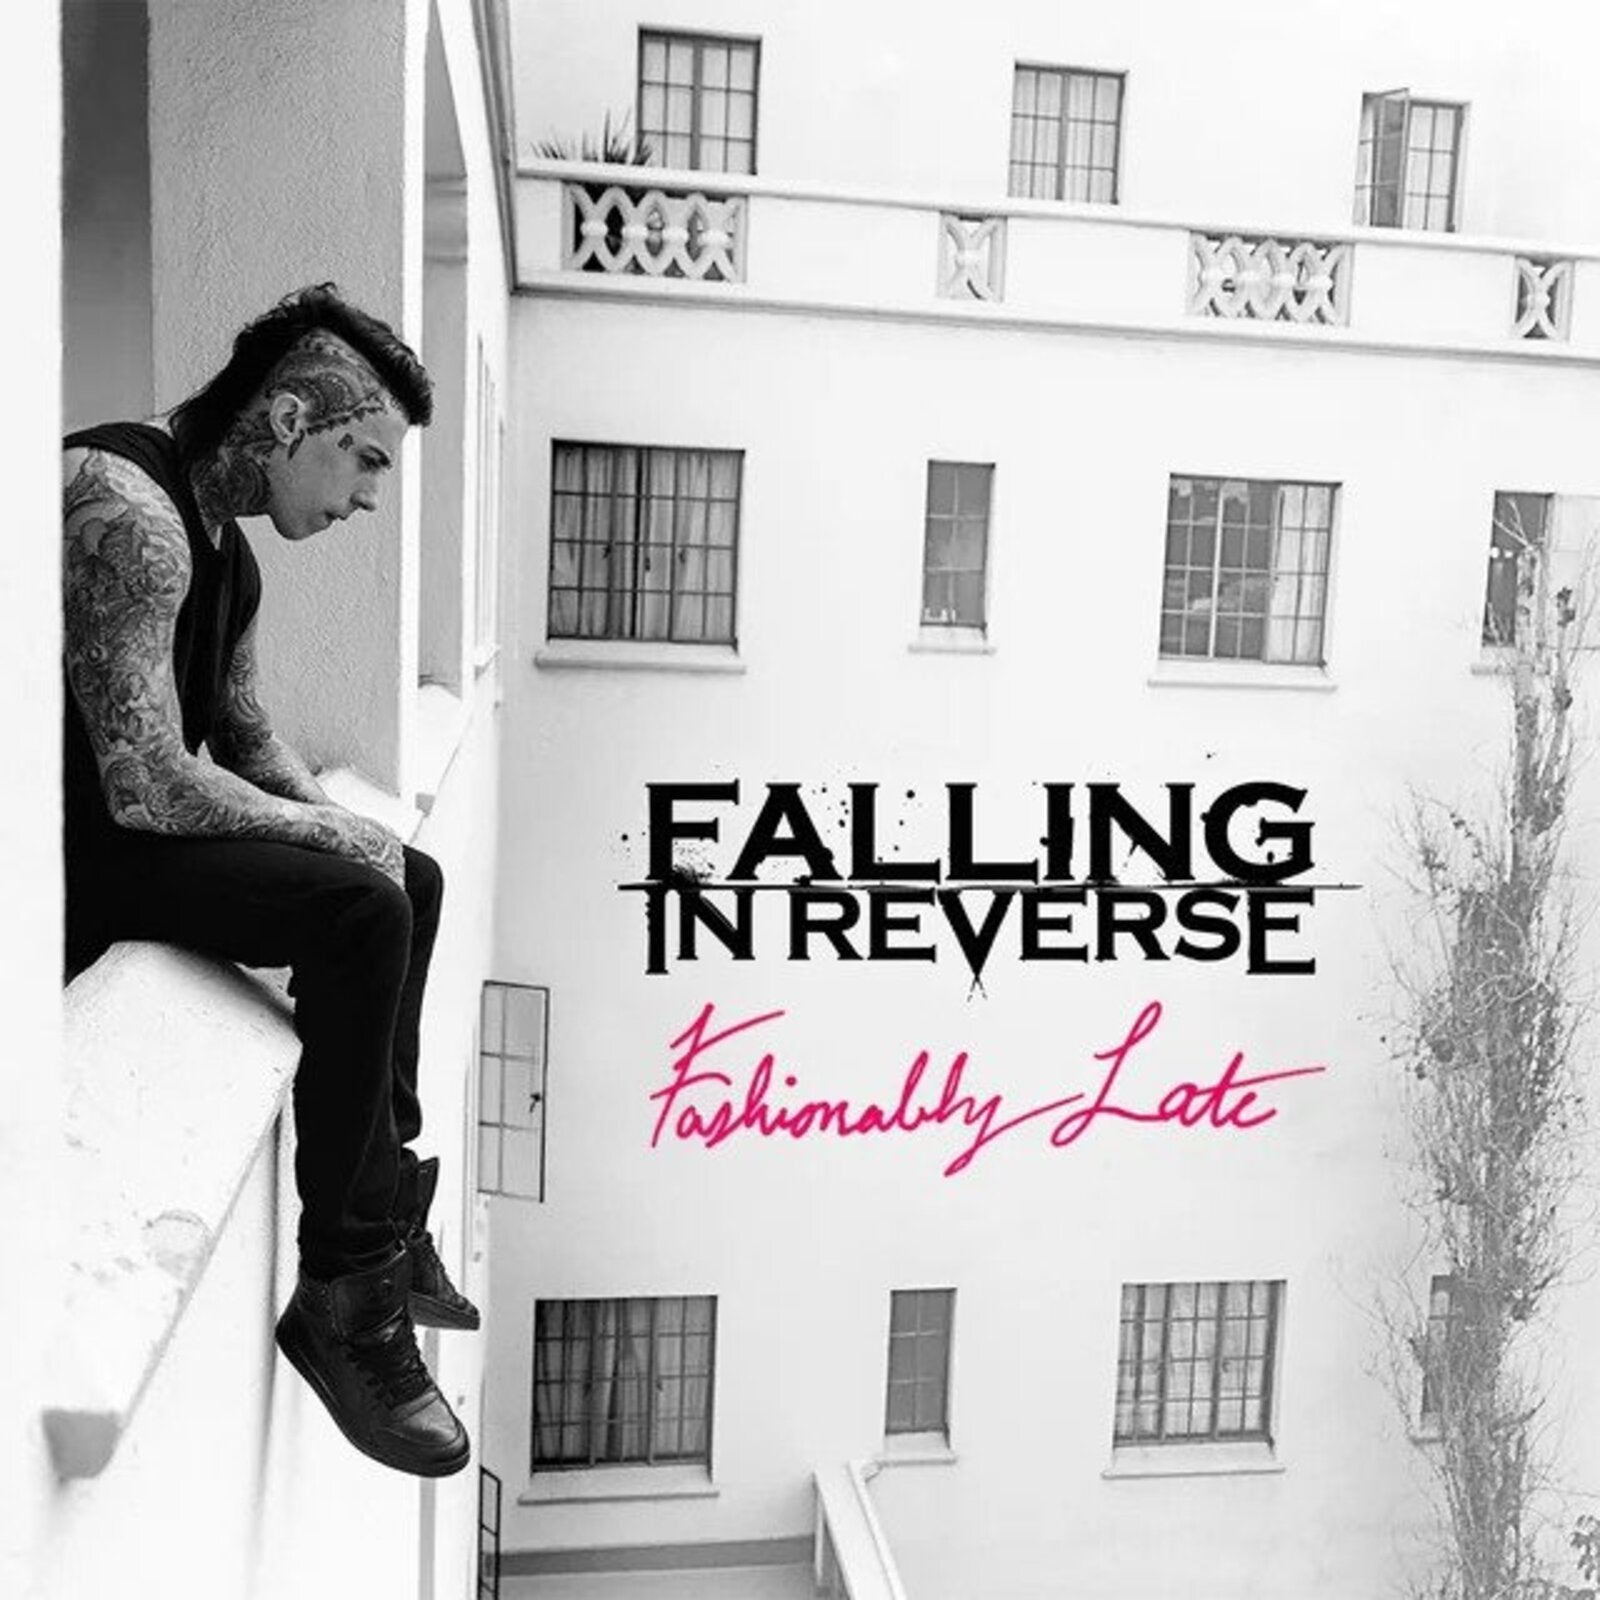 FALLING IN REVERSE / FASHIONABLY LATE (DLX) - The Grooveyard